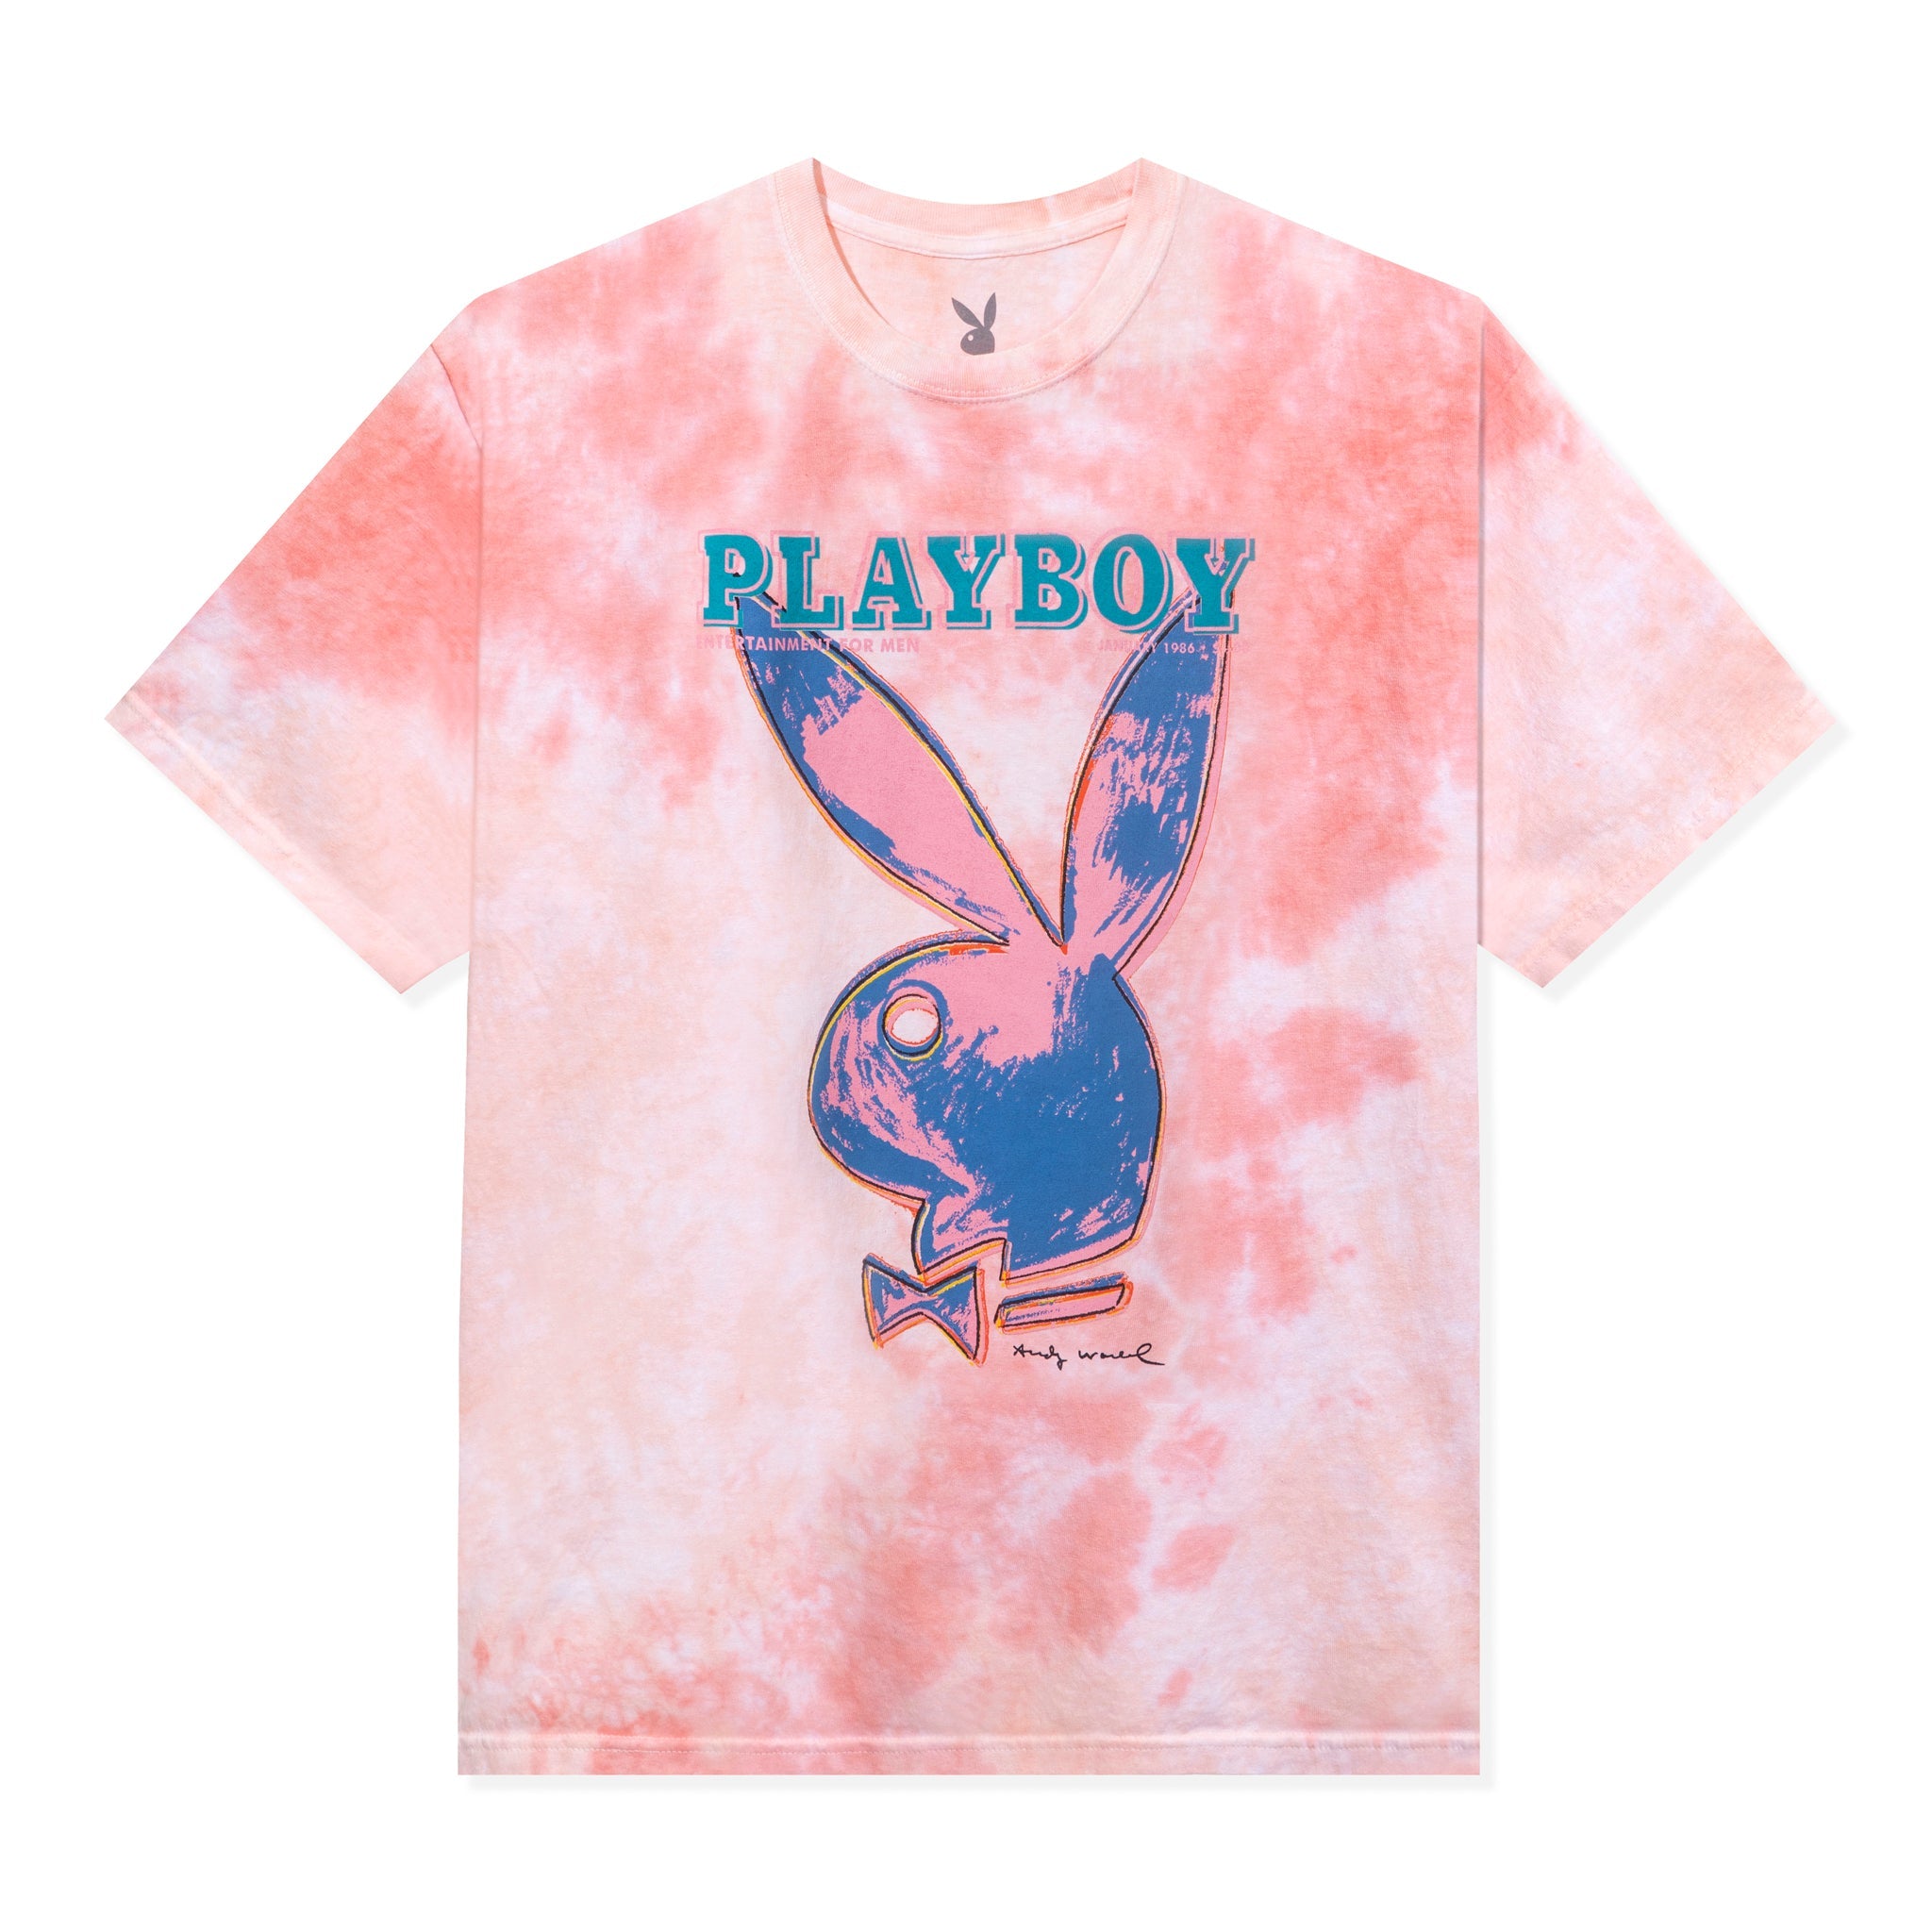 Discover The Andy Warhol Playboy Collection